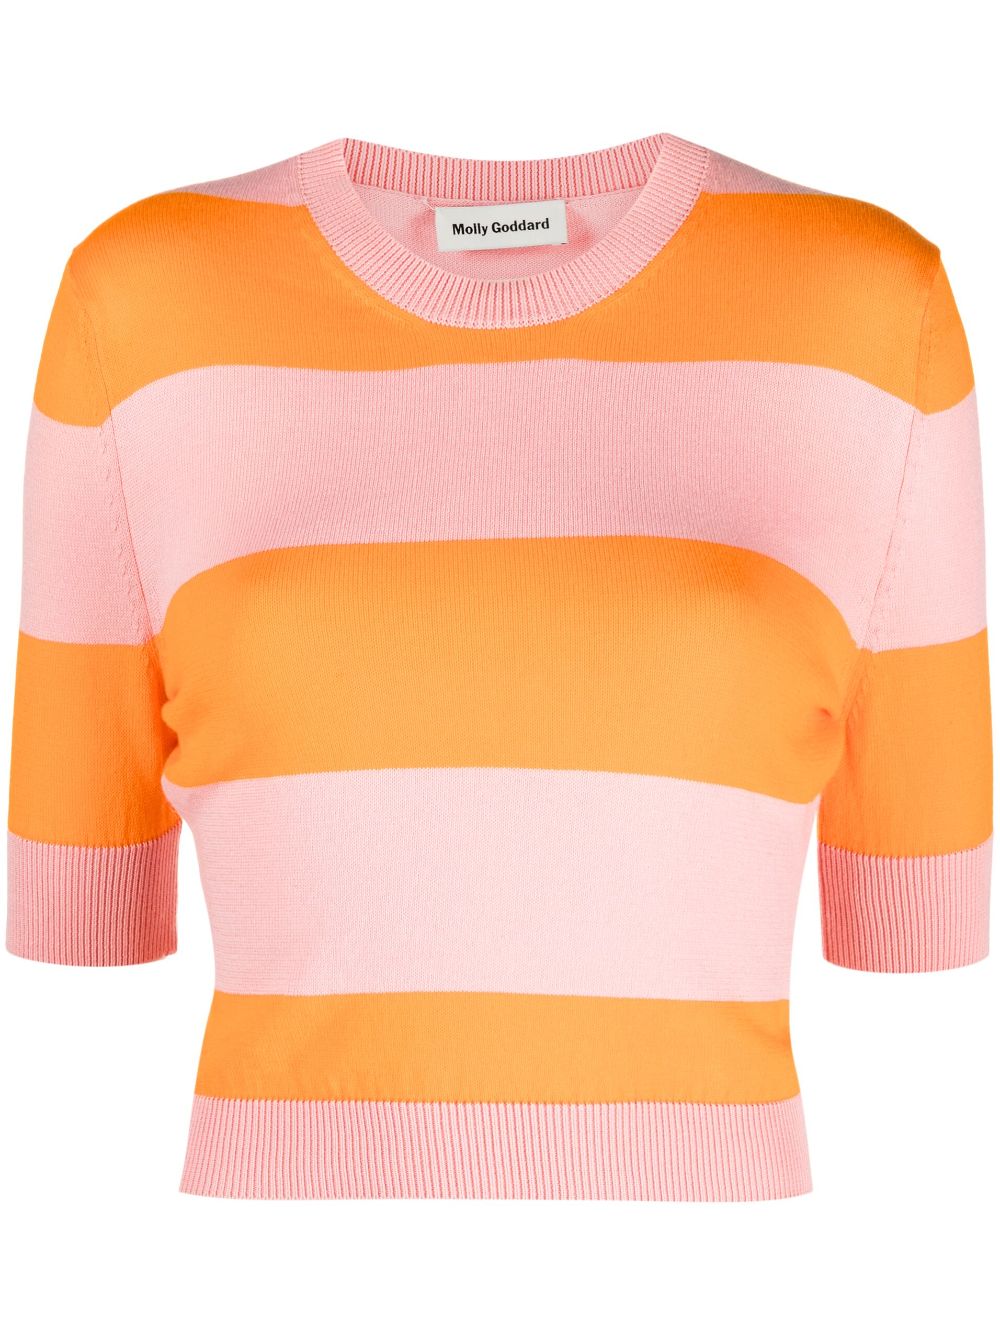 MOLLY GODDARD STRIPED KNITTED COTTON TOP